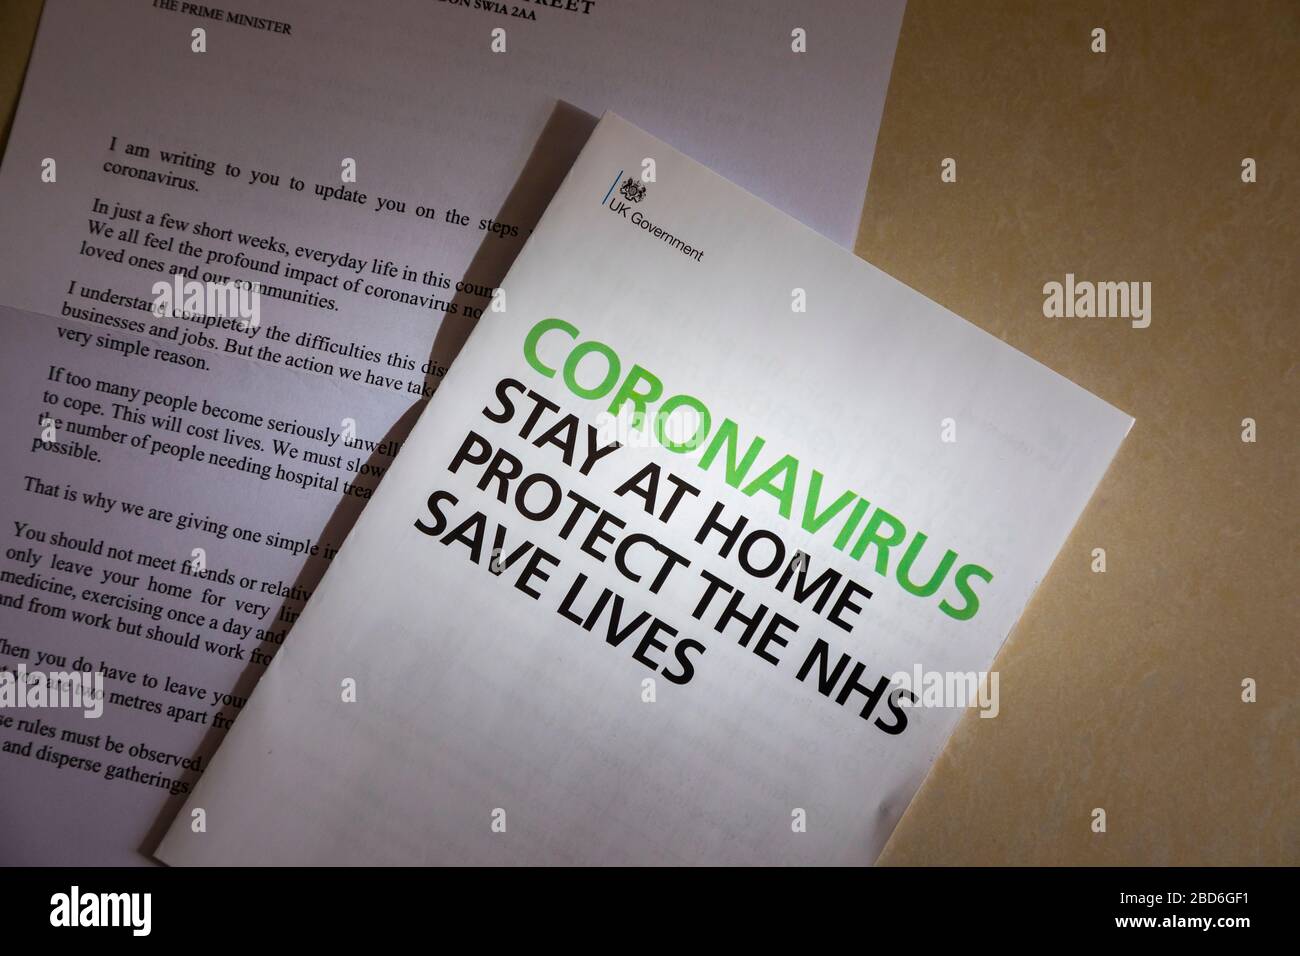 Coronavirus message from the UK Government in a letter and booklet posted to every home: stay at home, protect the NHS, save lives Stock Photo